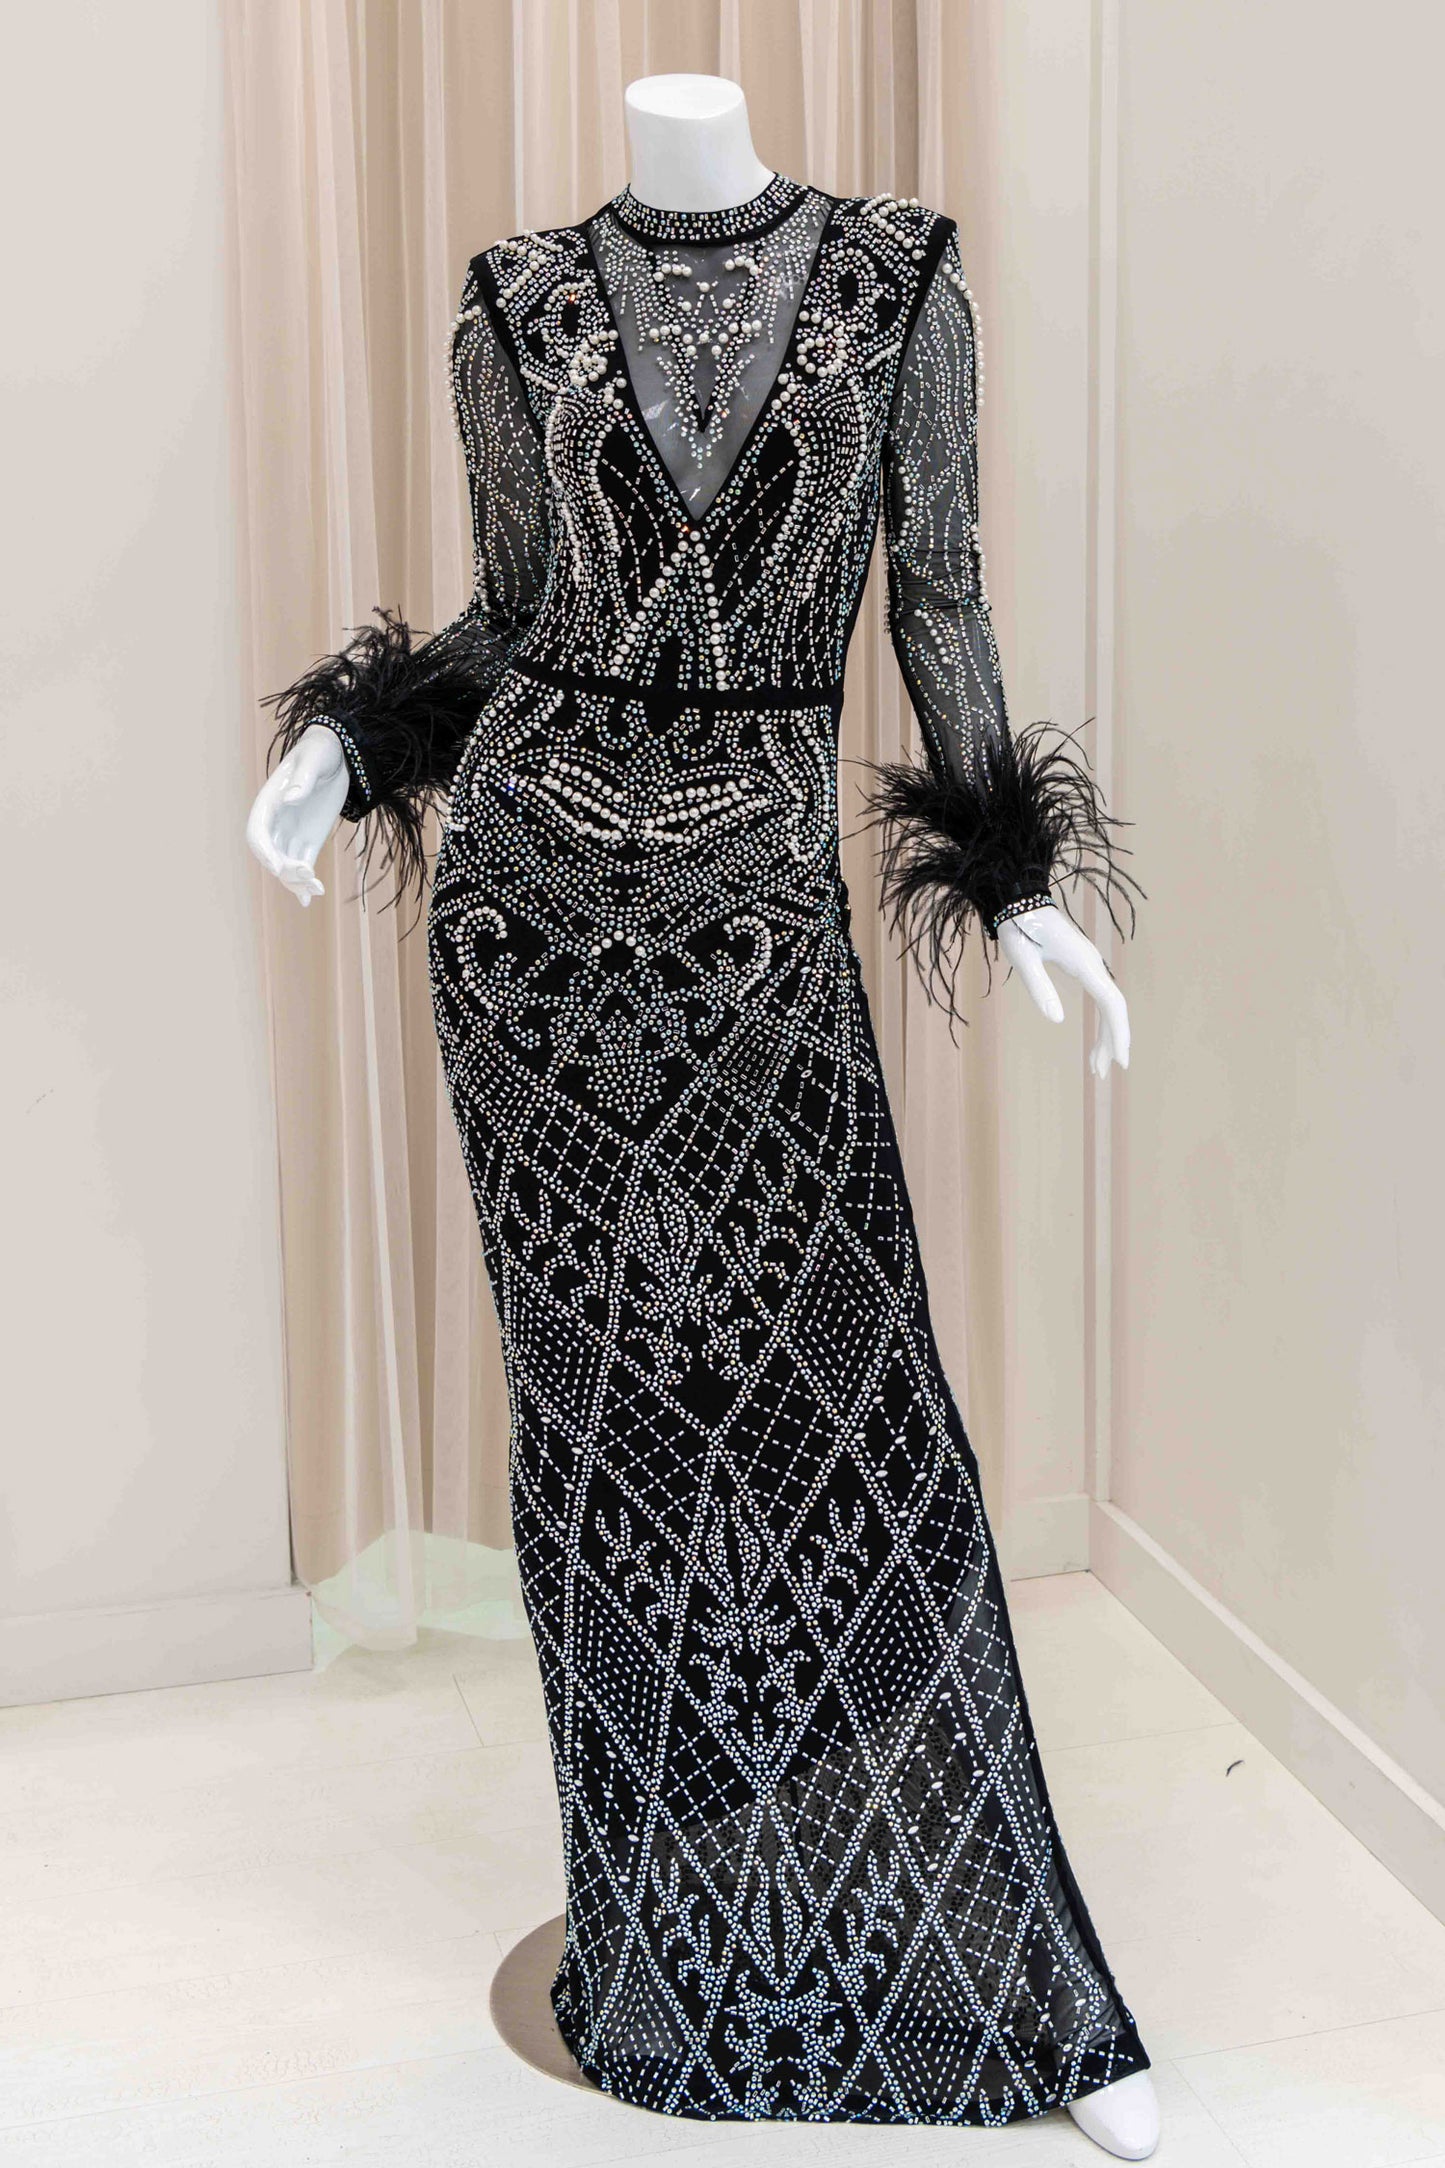 Dionne Long Sleeve Evening Gown in Black